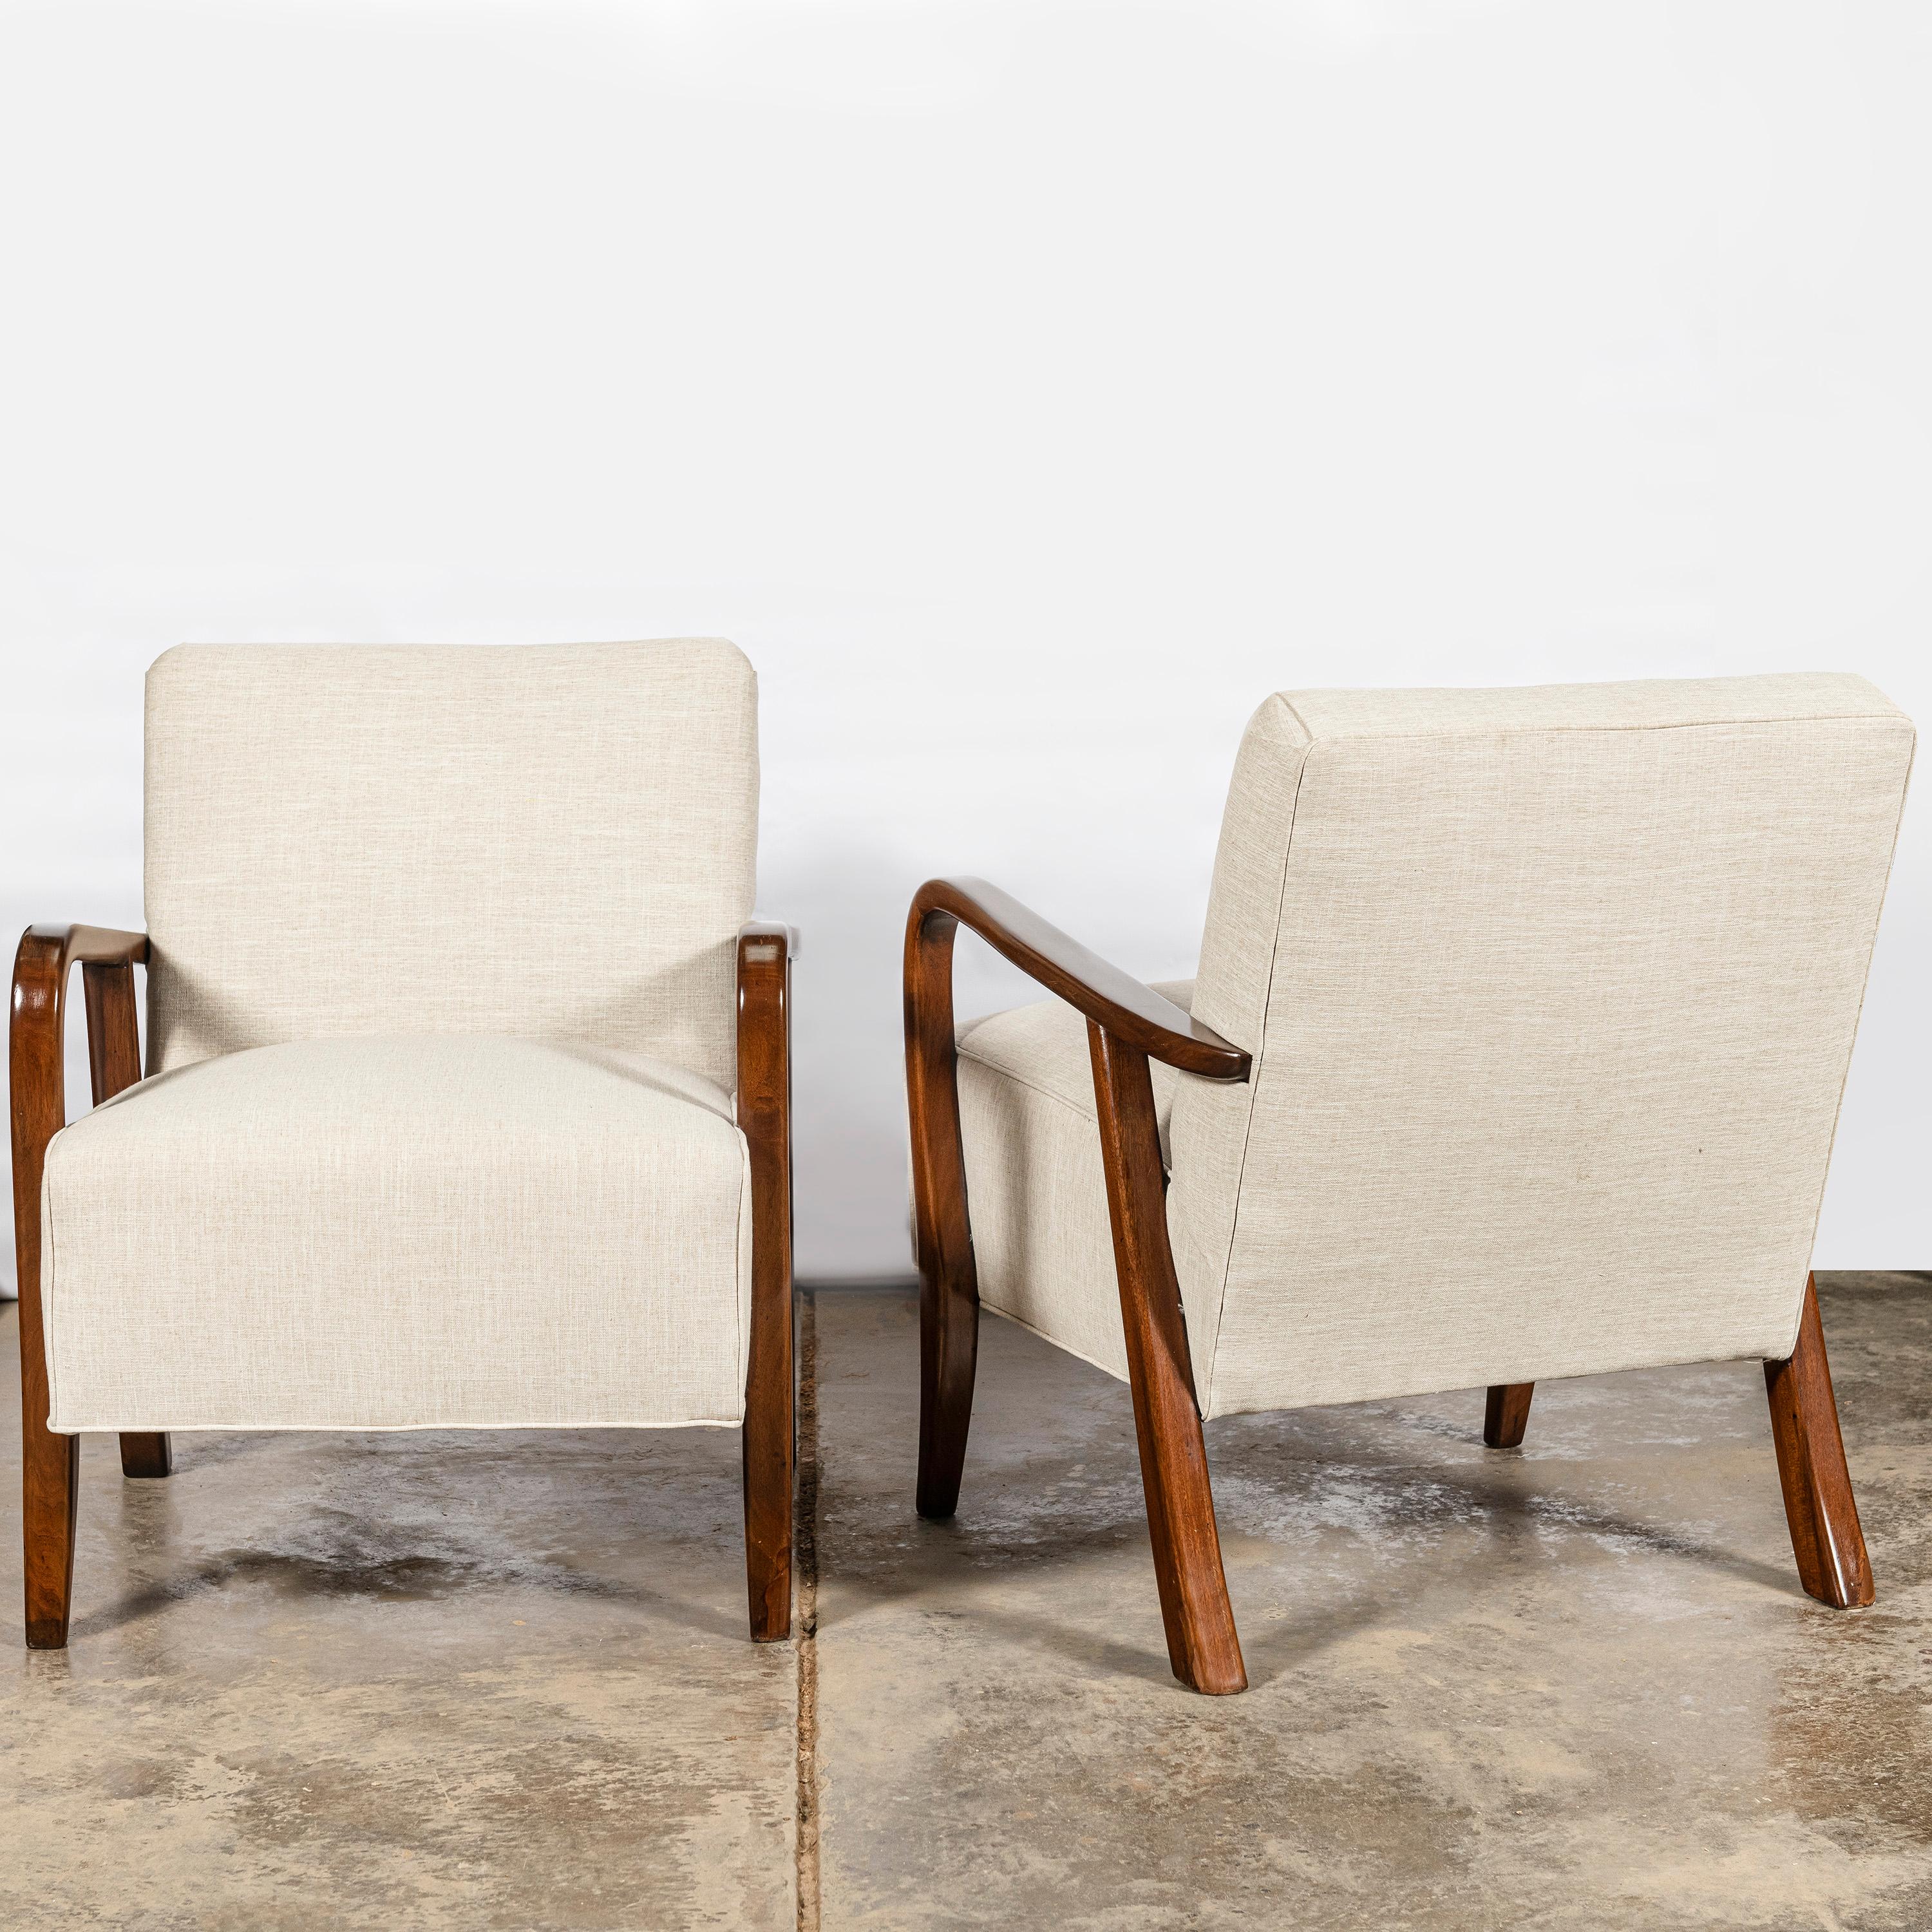 Mid-Century Modern Pair of Wood and Fabric Armchairs by Nordiska, Argentina, circa 1950 For Sale